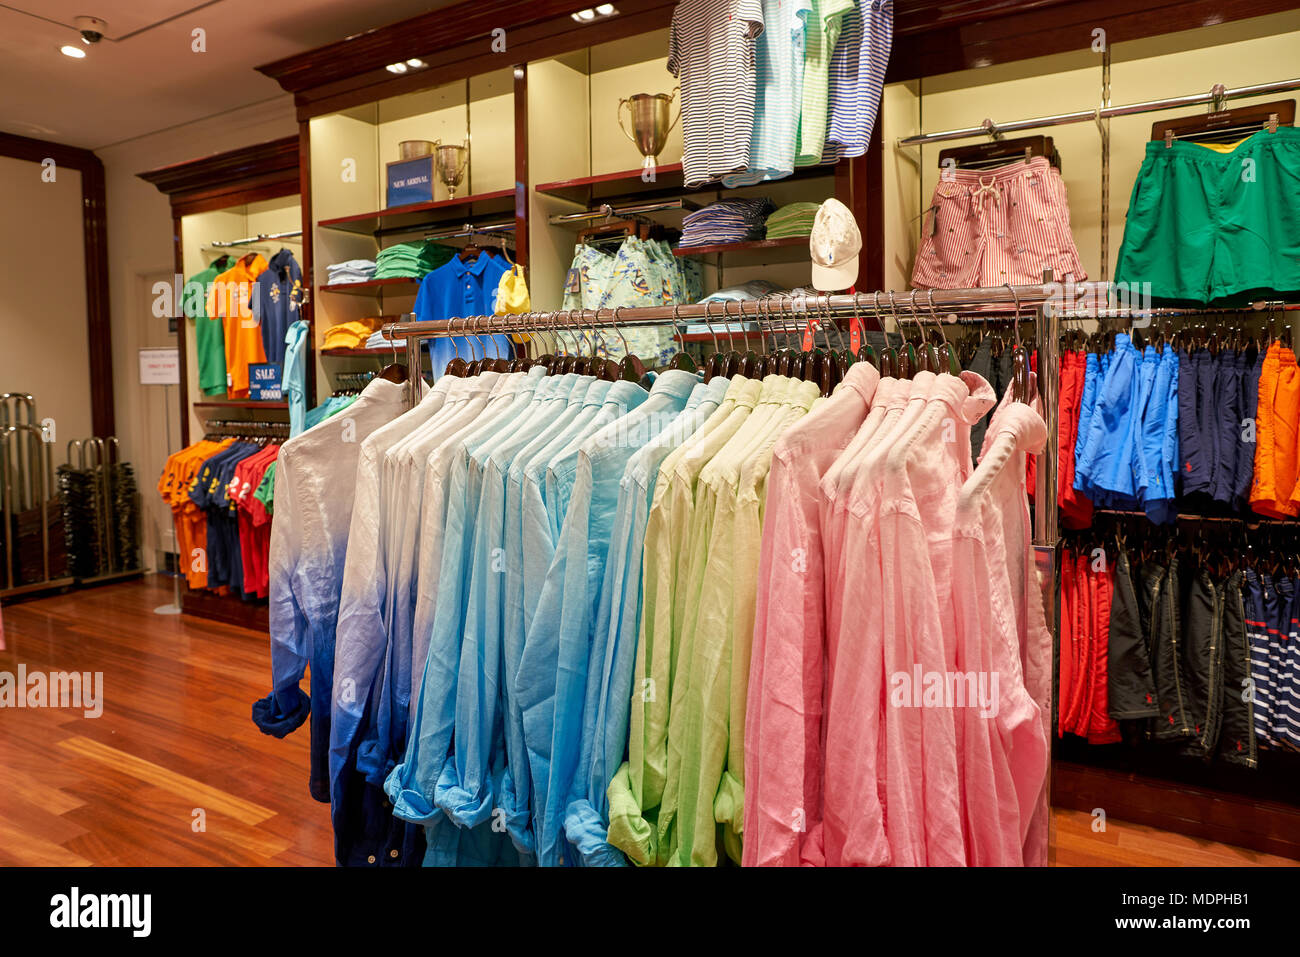 Polo Ralph Lauren Interior High Resolution Stock Photography and Images -  Alamy